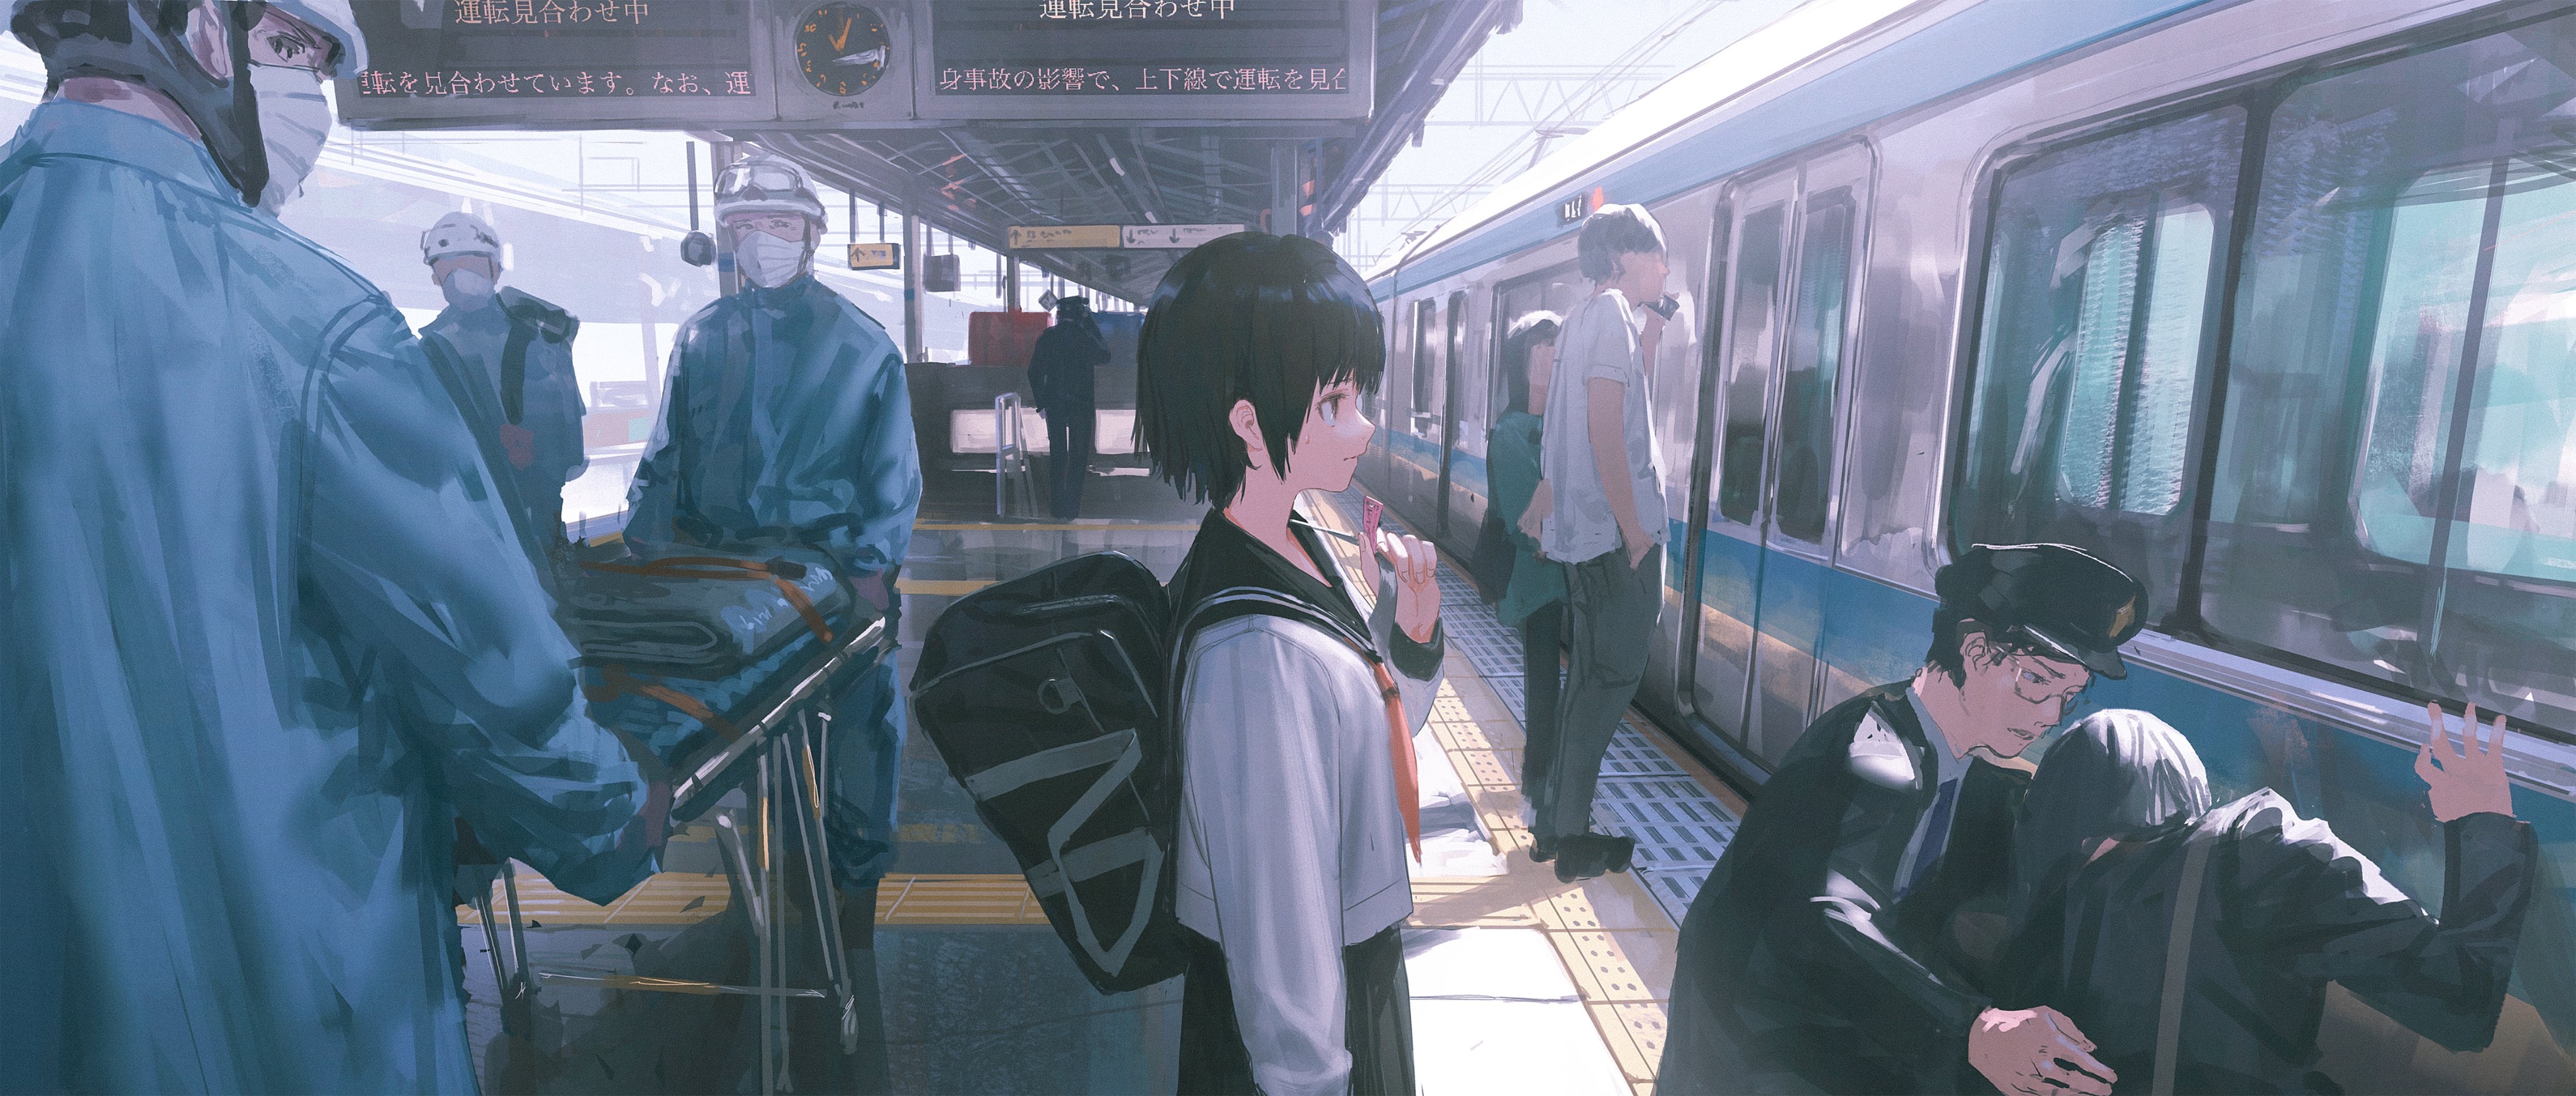 Medical Emergency at the Train Station by れおえん